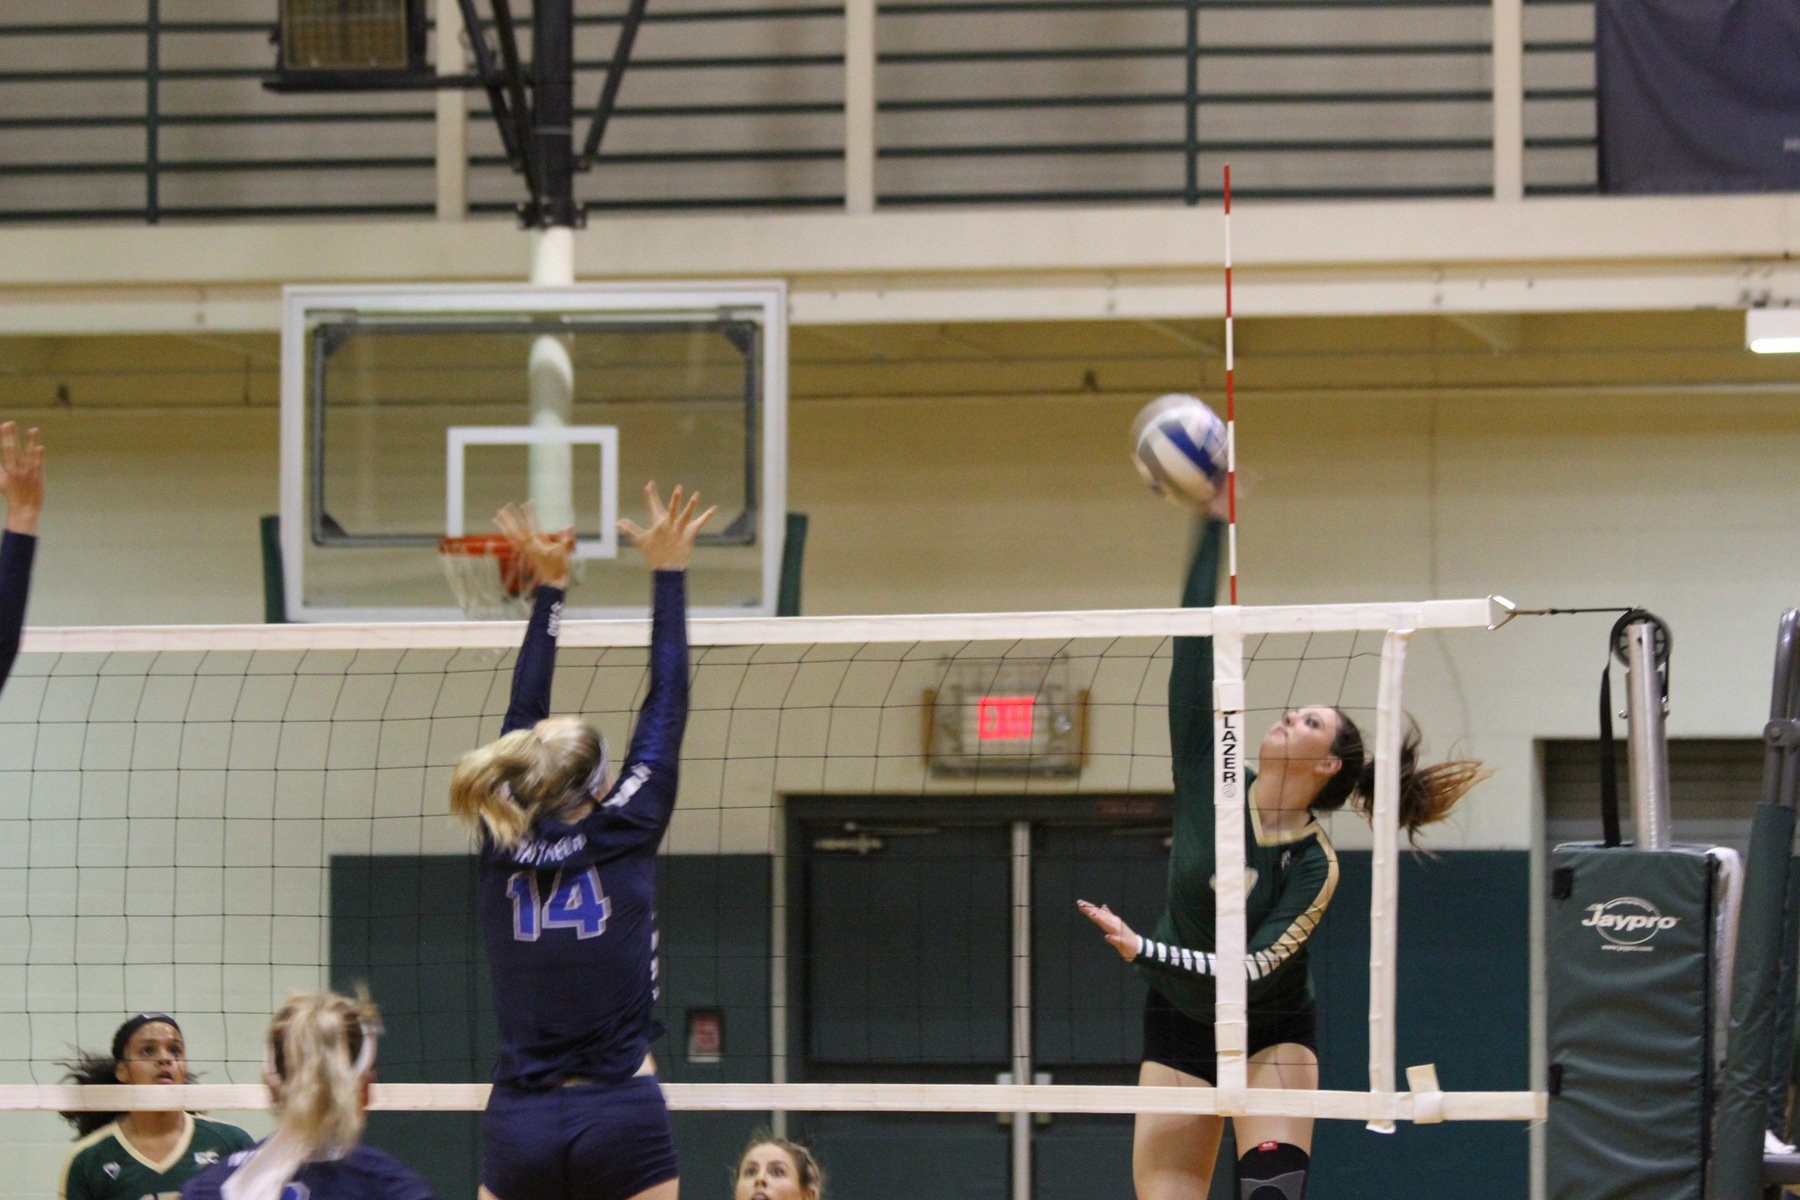 Women's Volleyball Advances To Title Match With Comeback Over Southern Vermont